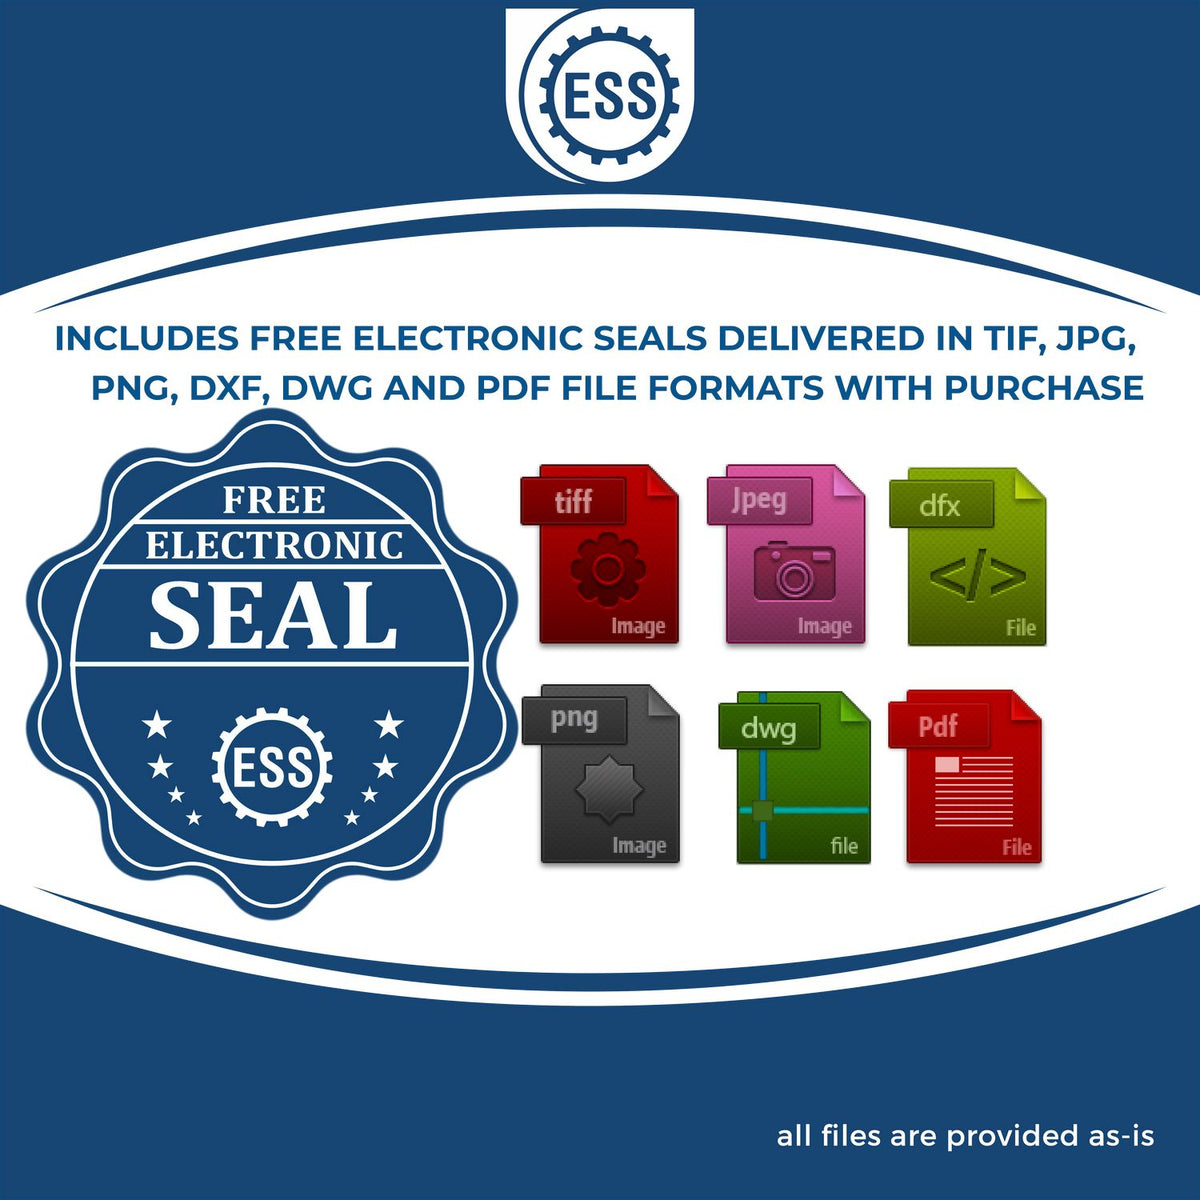 An infographic for the free electronic seal for the Premium MaxLight Pre-Inked South Carolina Geology Stamp illustrating the different file type icons such as DXF, DWG, TIF, JPG and PNG.